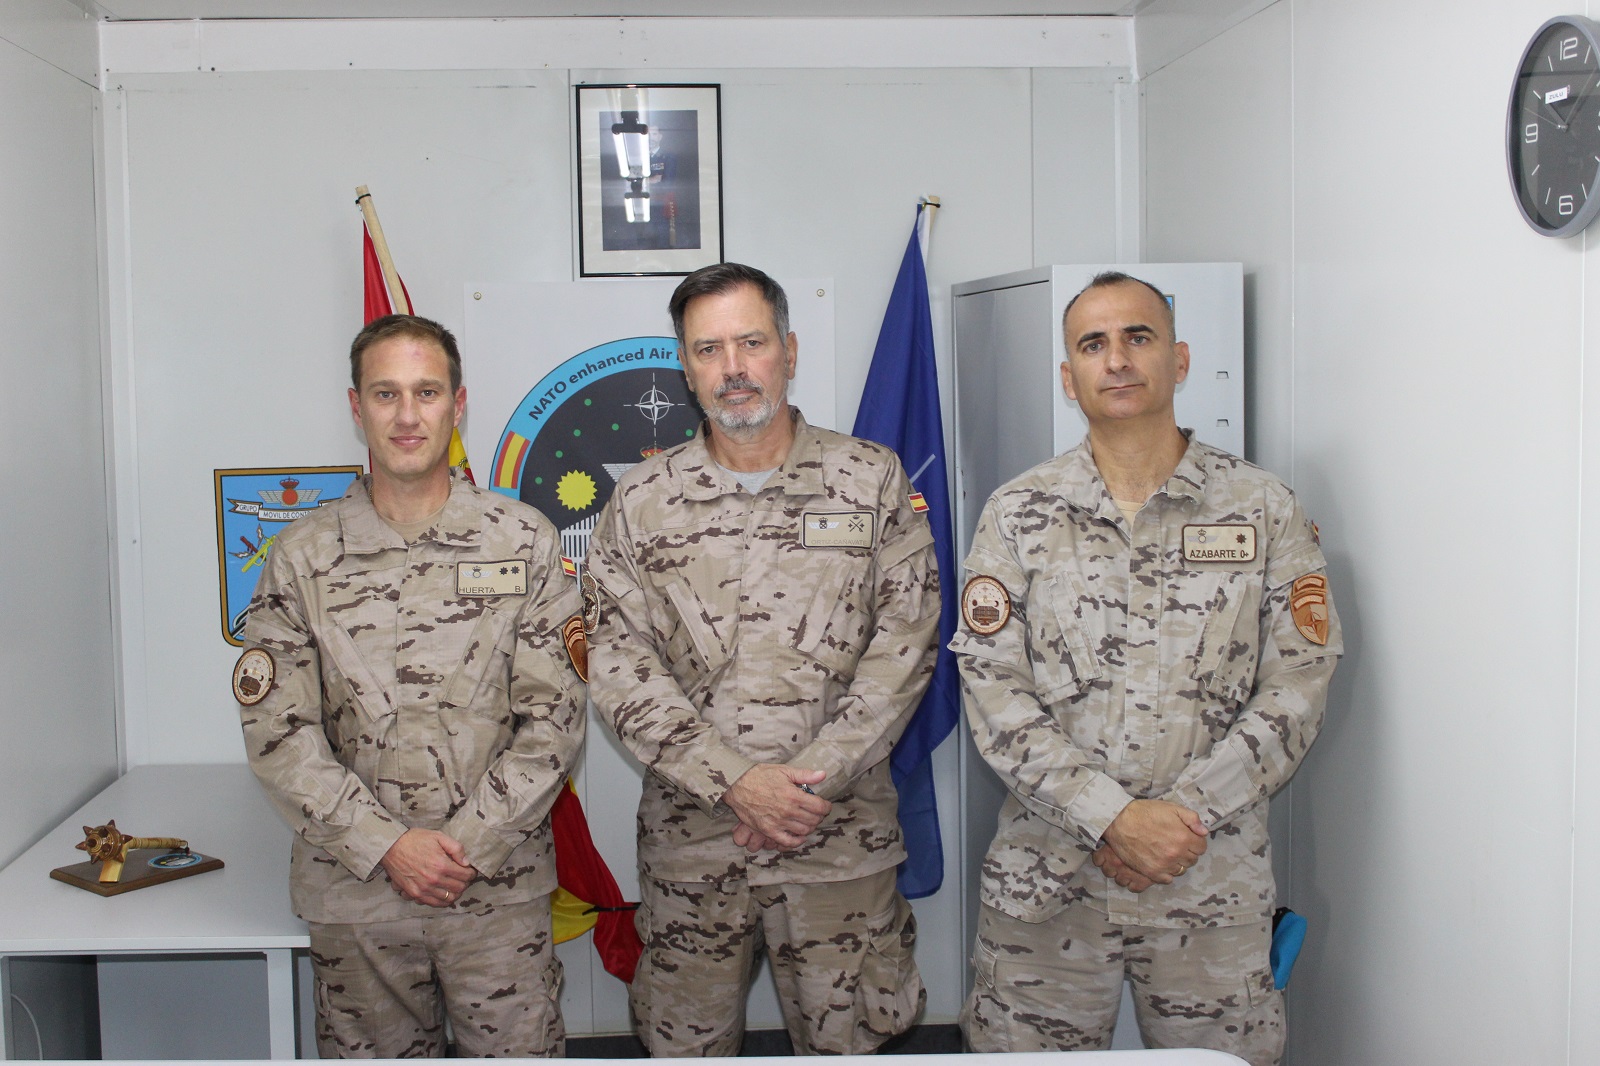 General Ortiz-Cañavate with Lieutenant Colonel Huerta and Major Azabarte